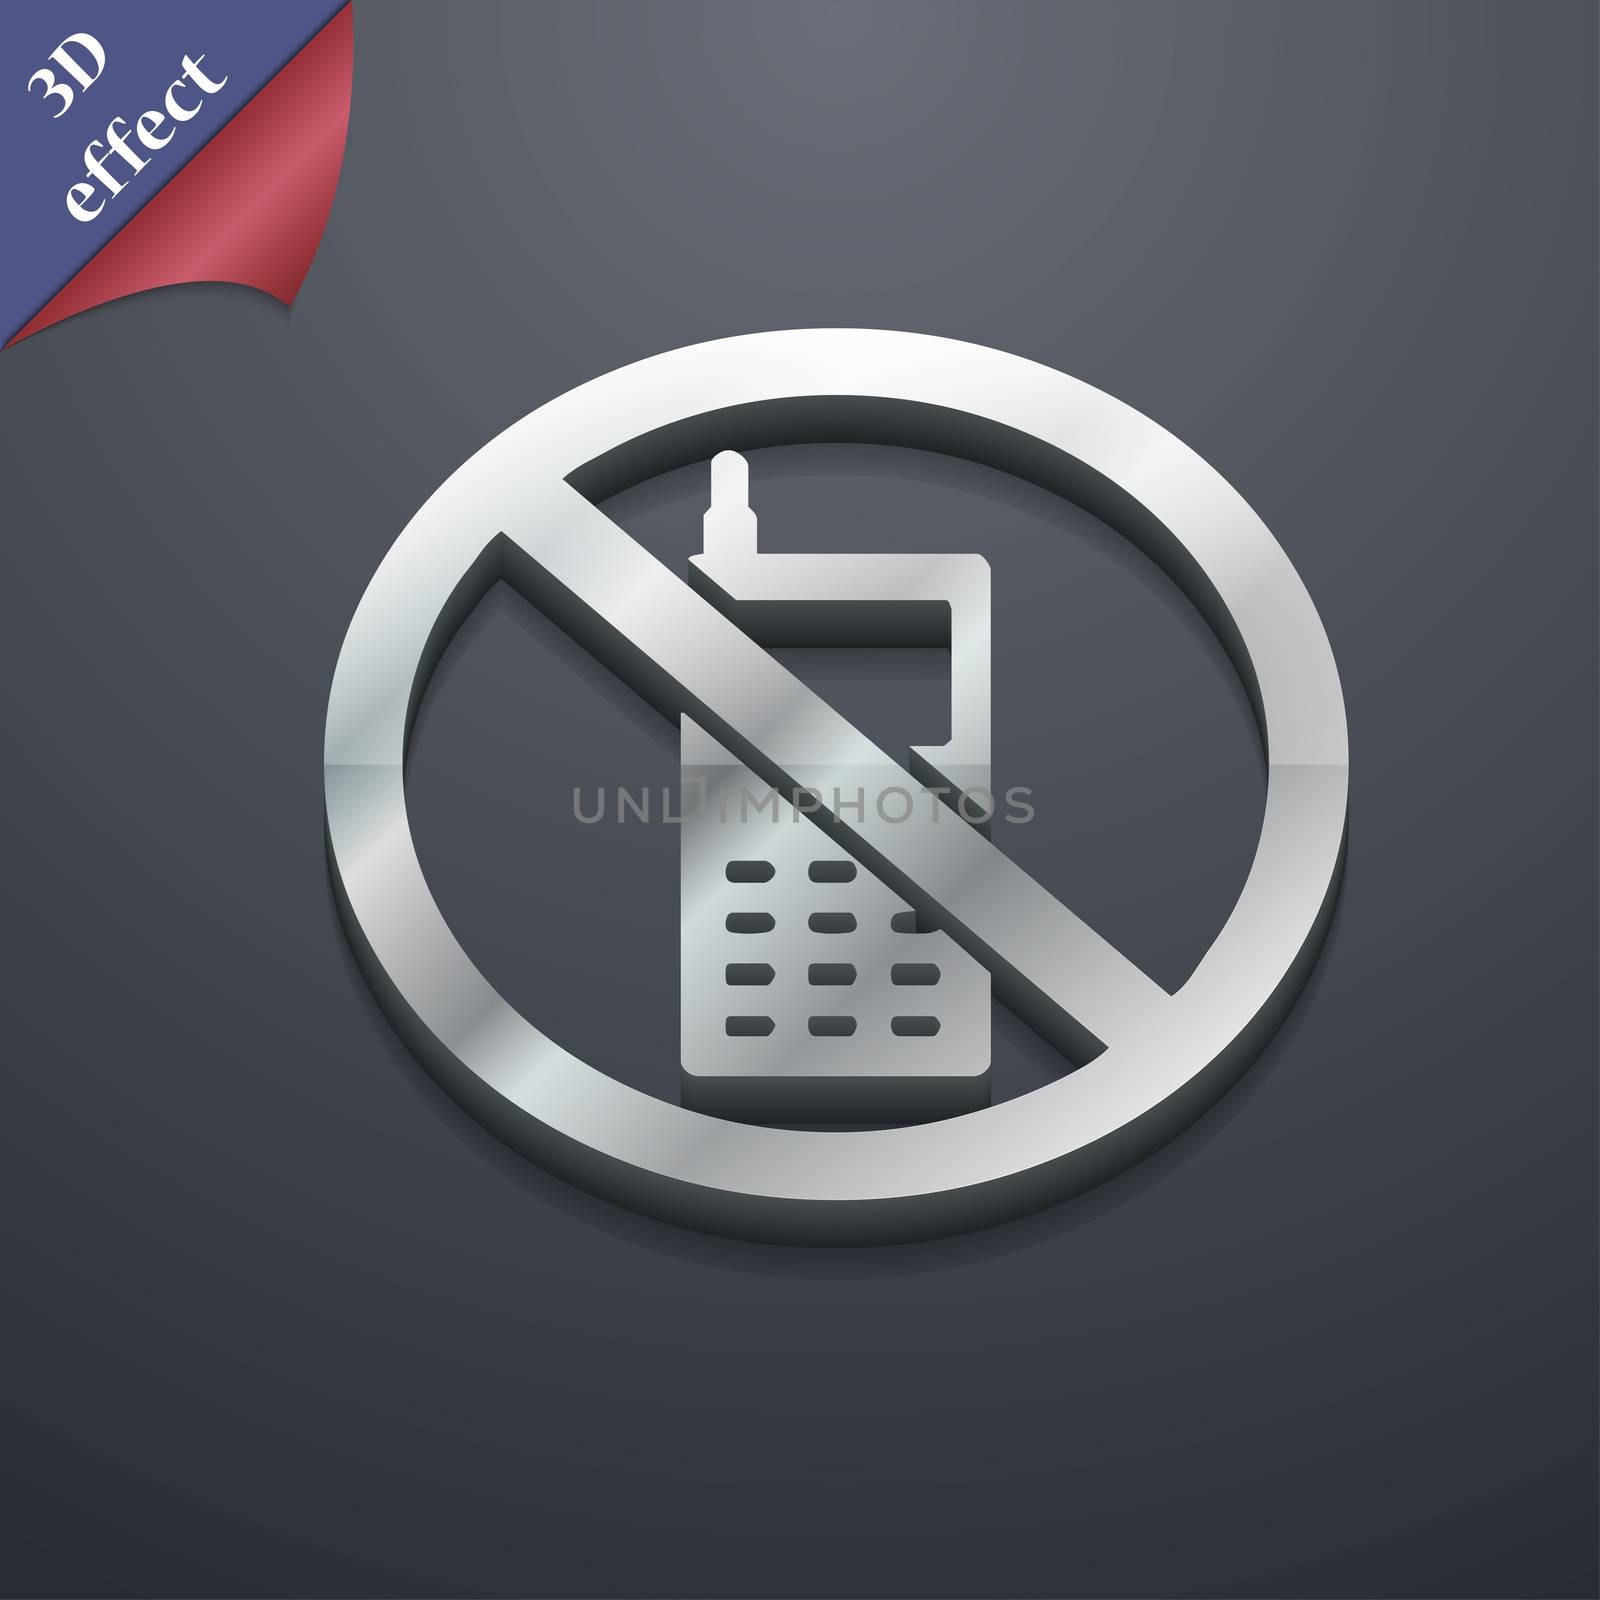 mobile phone is prohibited icon symbol. 3D style. Trendy, modern design with space for your text illustration. Rastrized copy